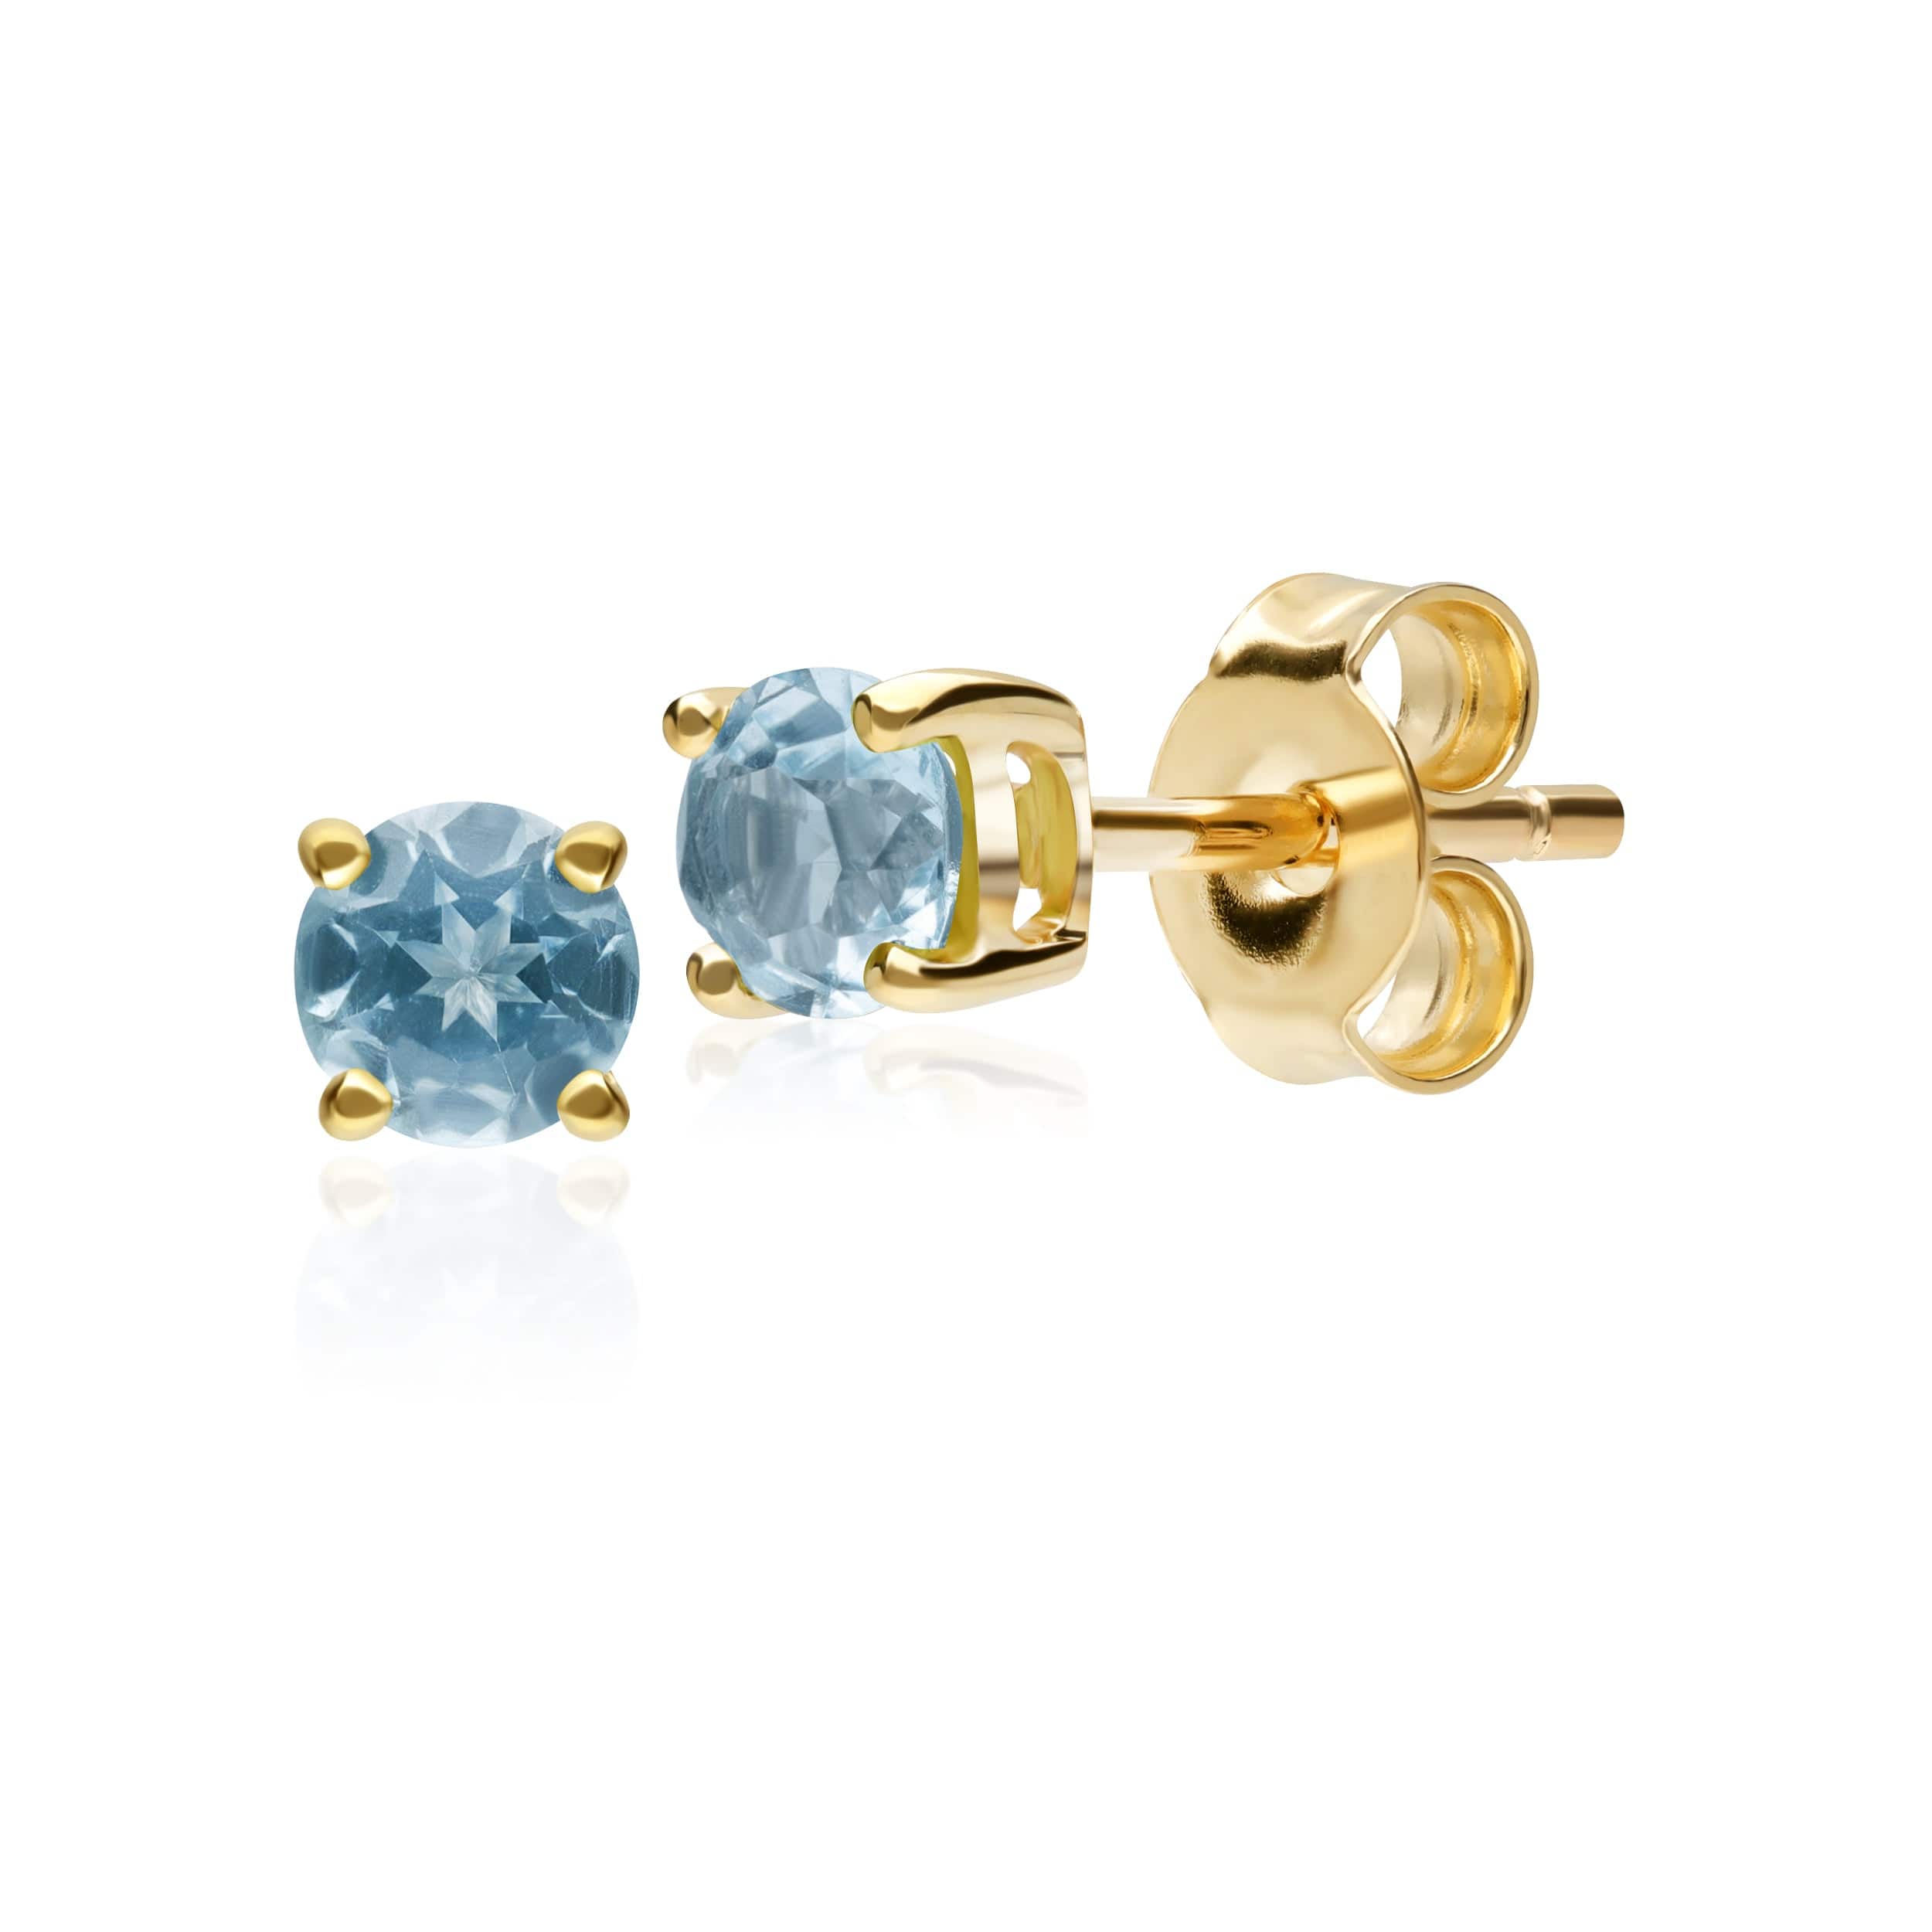 11555 Classic Round Blue Topaz Stud Earrings in 9ct Yellow Gold 1